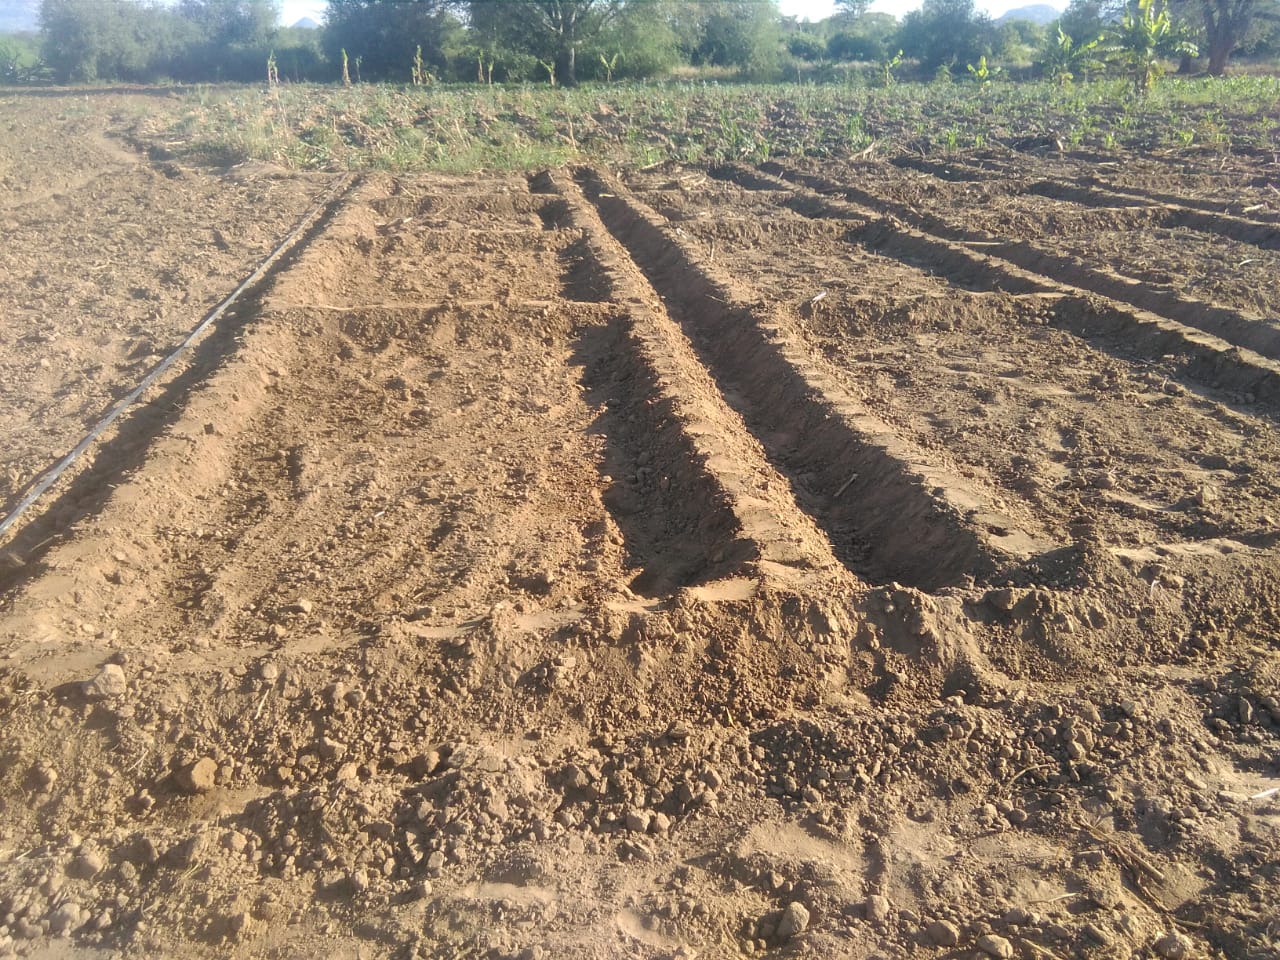 Patelo Field School in Bibala Have Their Beds Ready For Planting